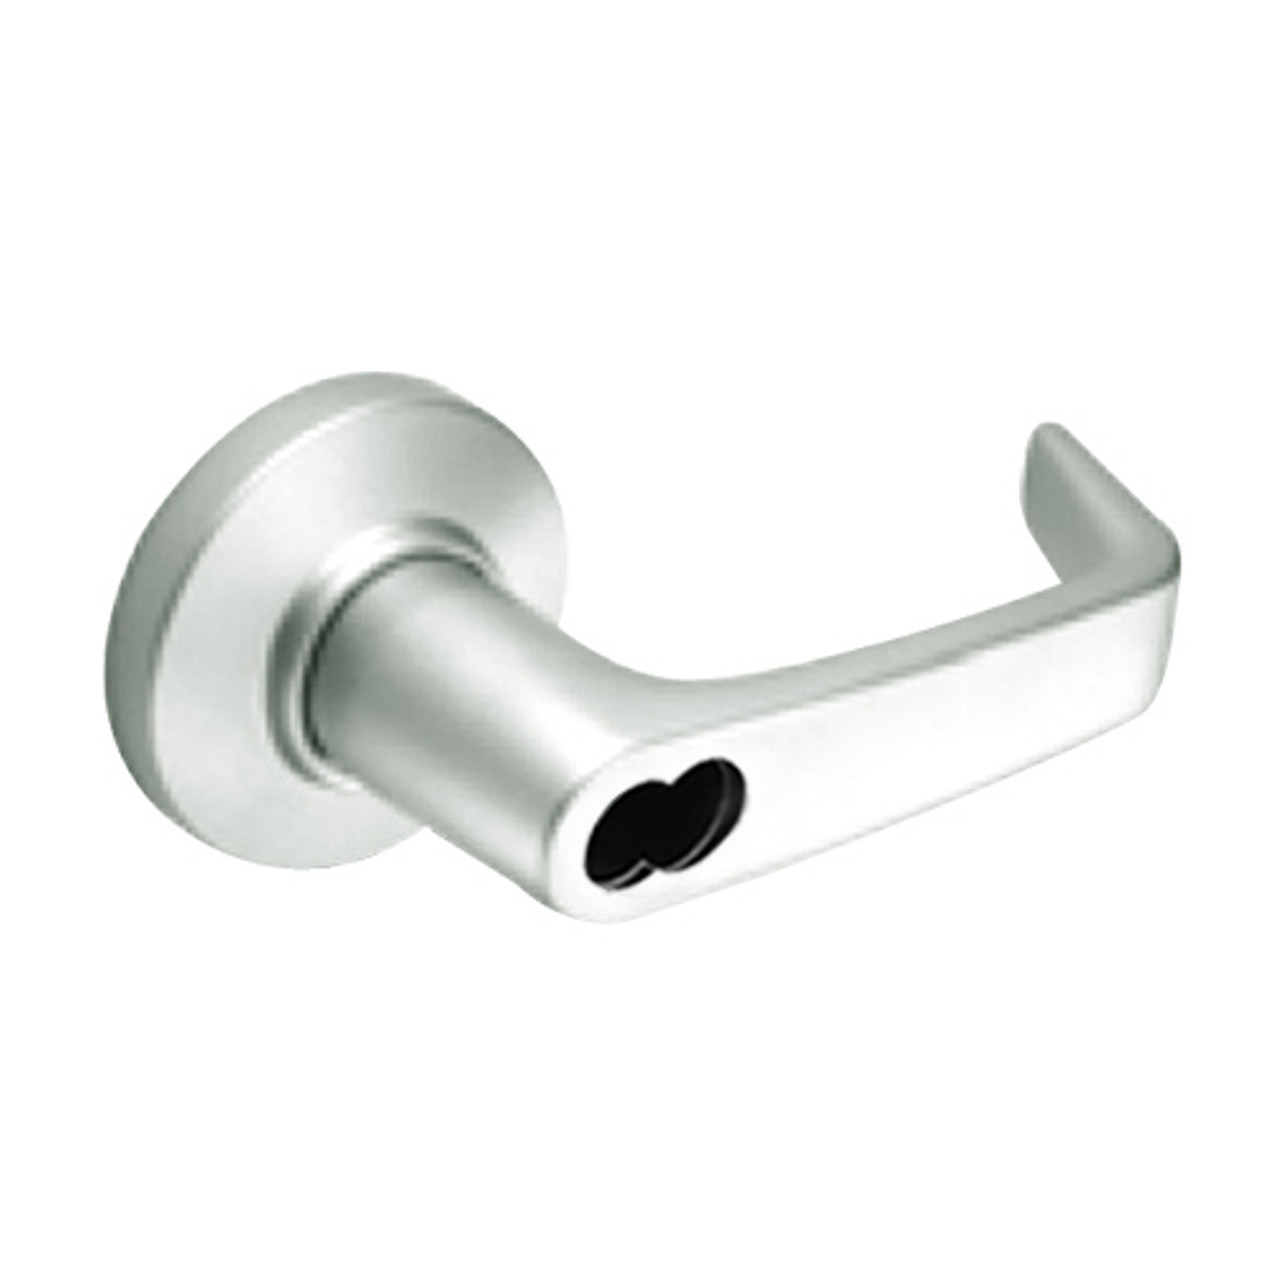 9K57AB15CSTK618LM Best 9K Series Entrance Cylindrical Lever Locks with Contour Angle with Return Lever Design Accept 7 Pin Best Core in Bright Nickel